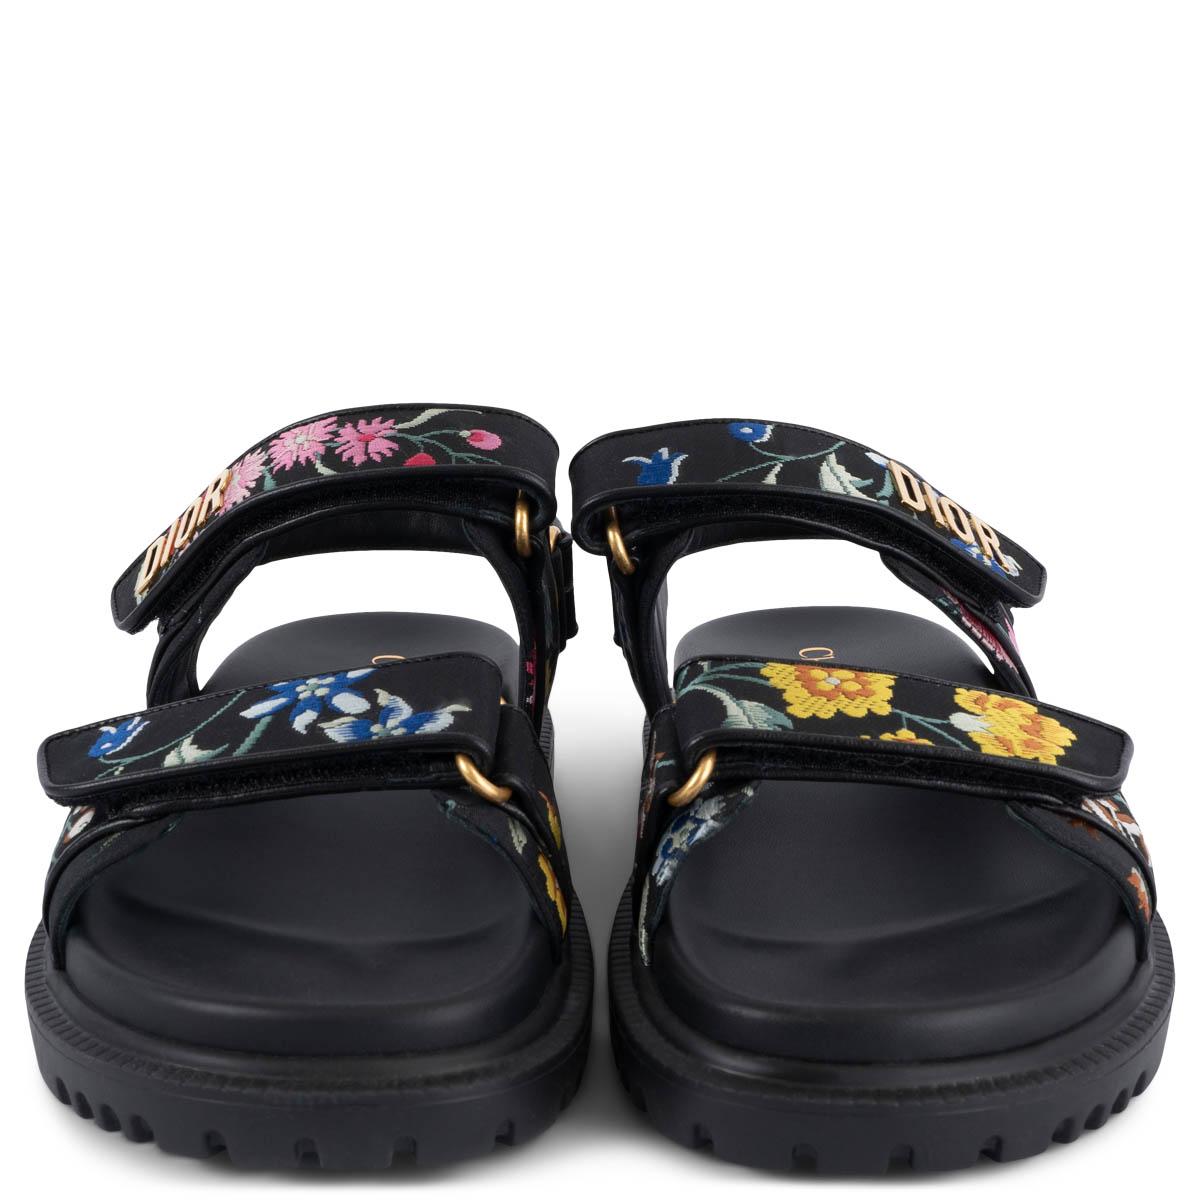 100% authentic Christian Dior 2023 DiorAct sandals in black calfskin and technical fabric embroidered with Dior Petites Fleurs motif. The design features gold-finish metal 'DIOR' signature, two adjustable scratch straps, a anatomically shaped